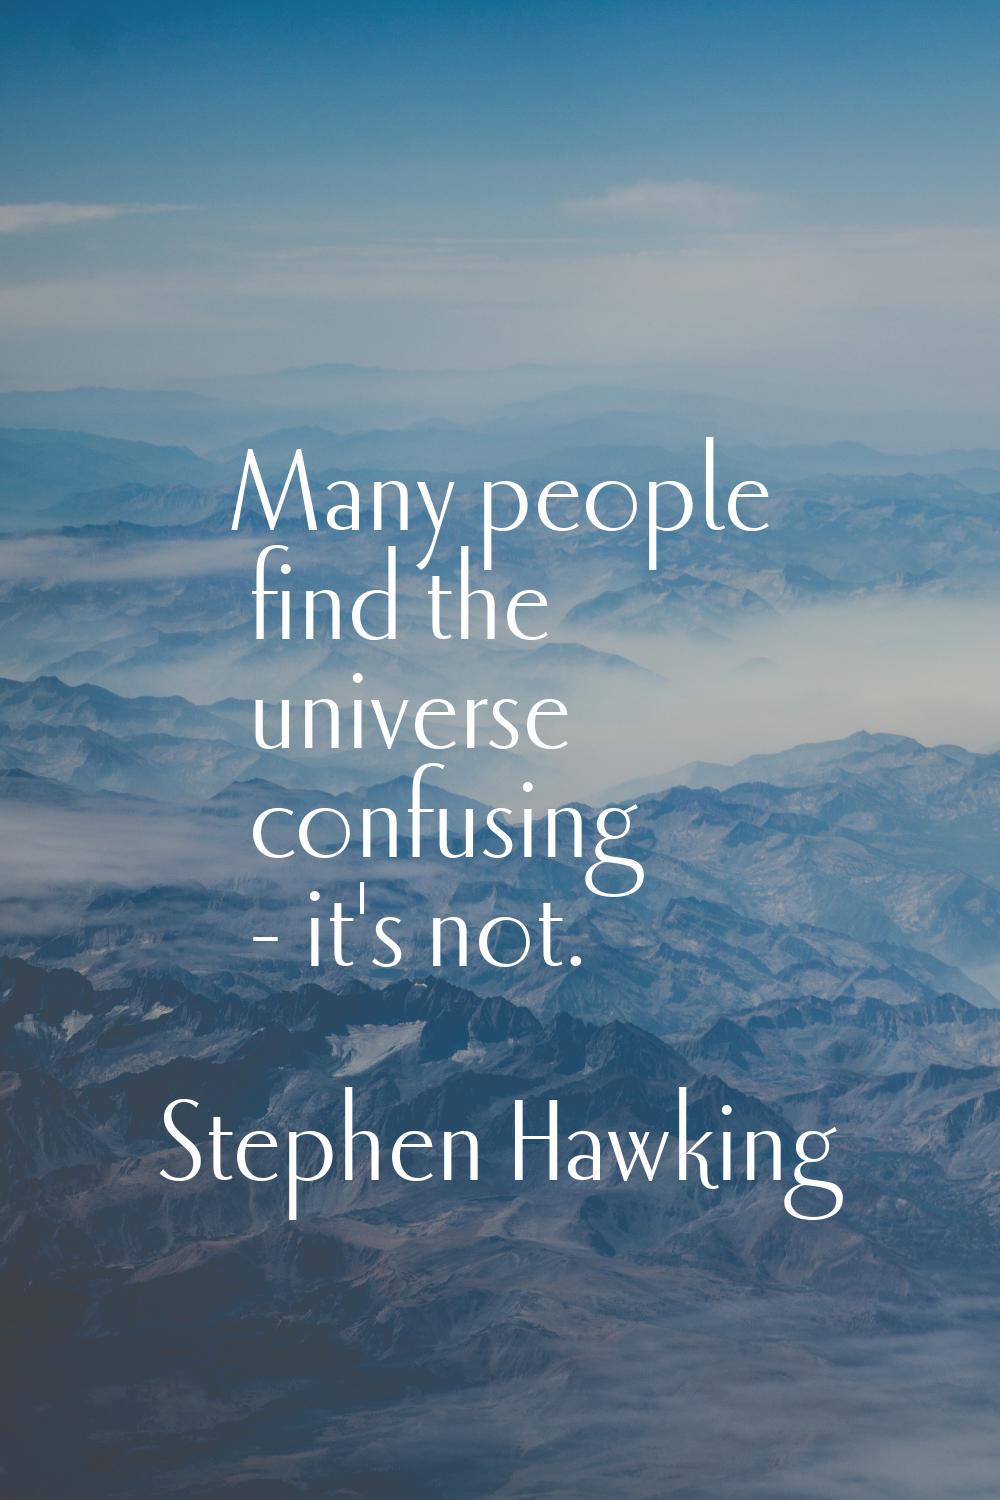 Many people find the universe confusing - it's not.